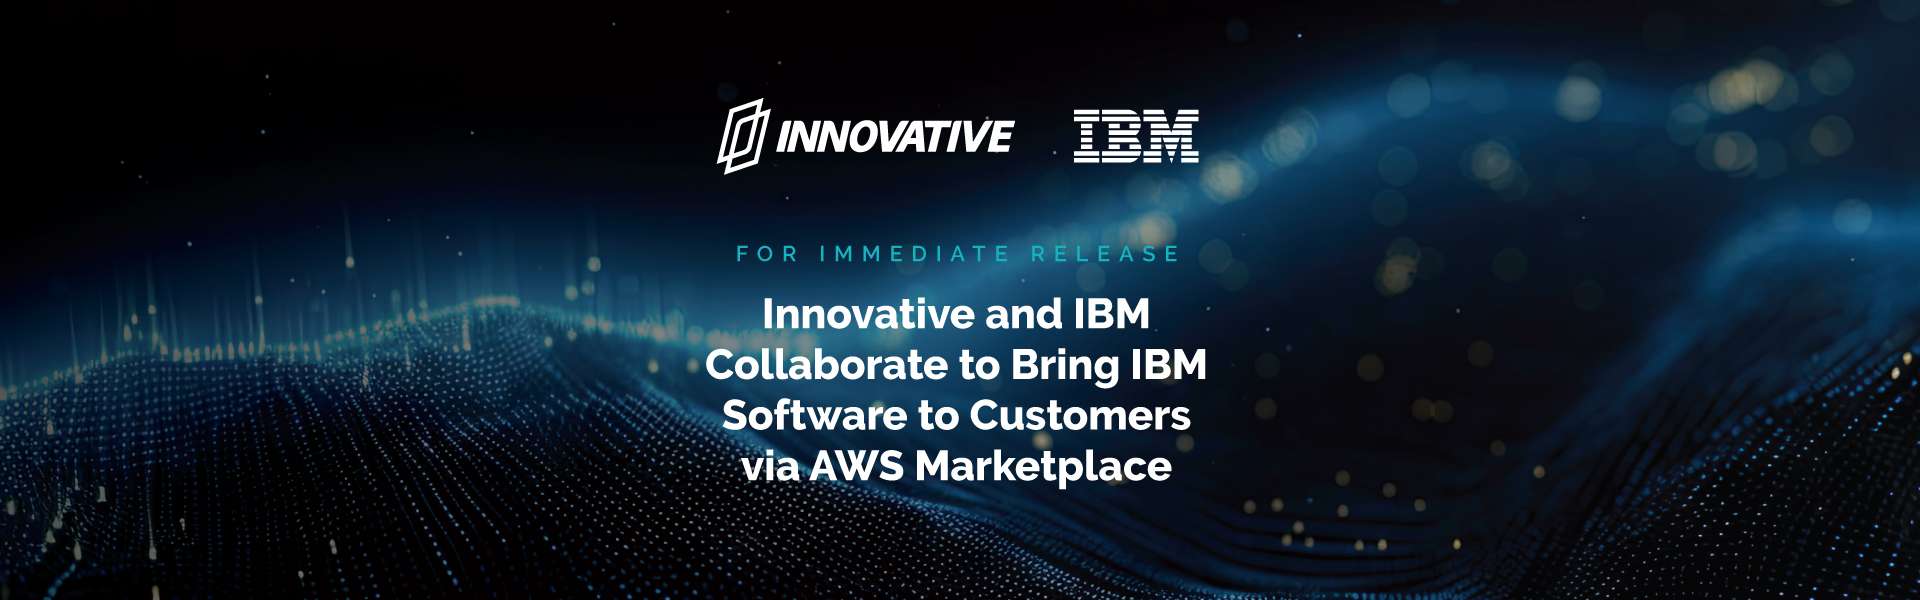 Innovative Solutions and IBM Collaborate to Bring IBM Software to Customers via AWS Marketplace